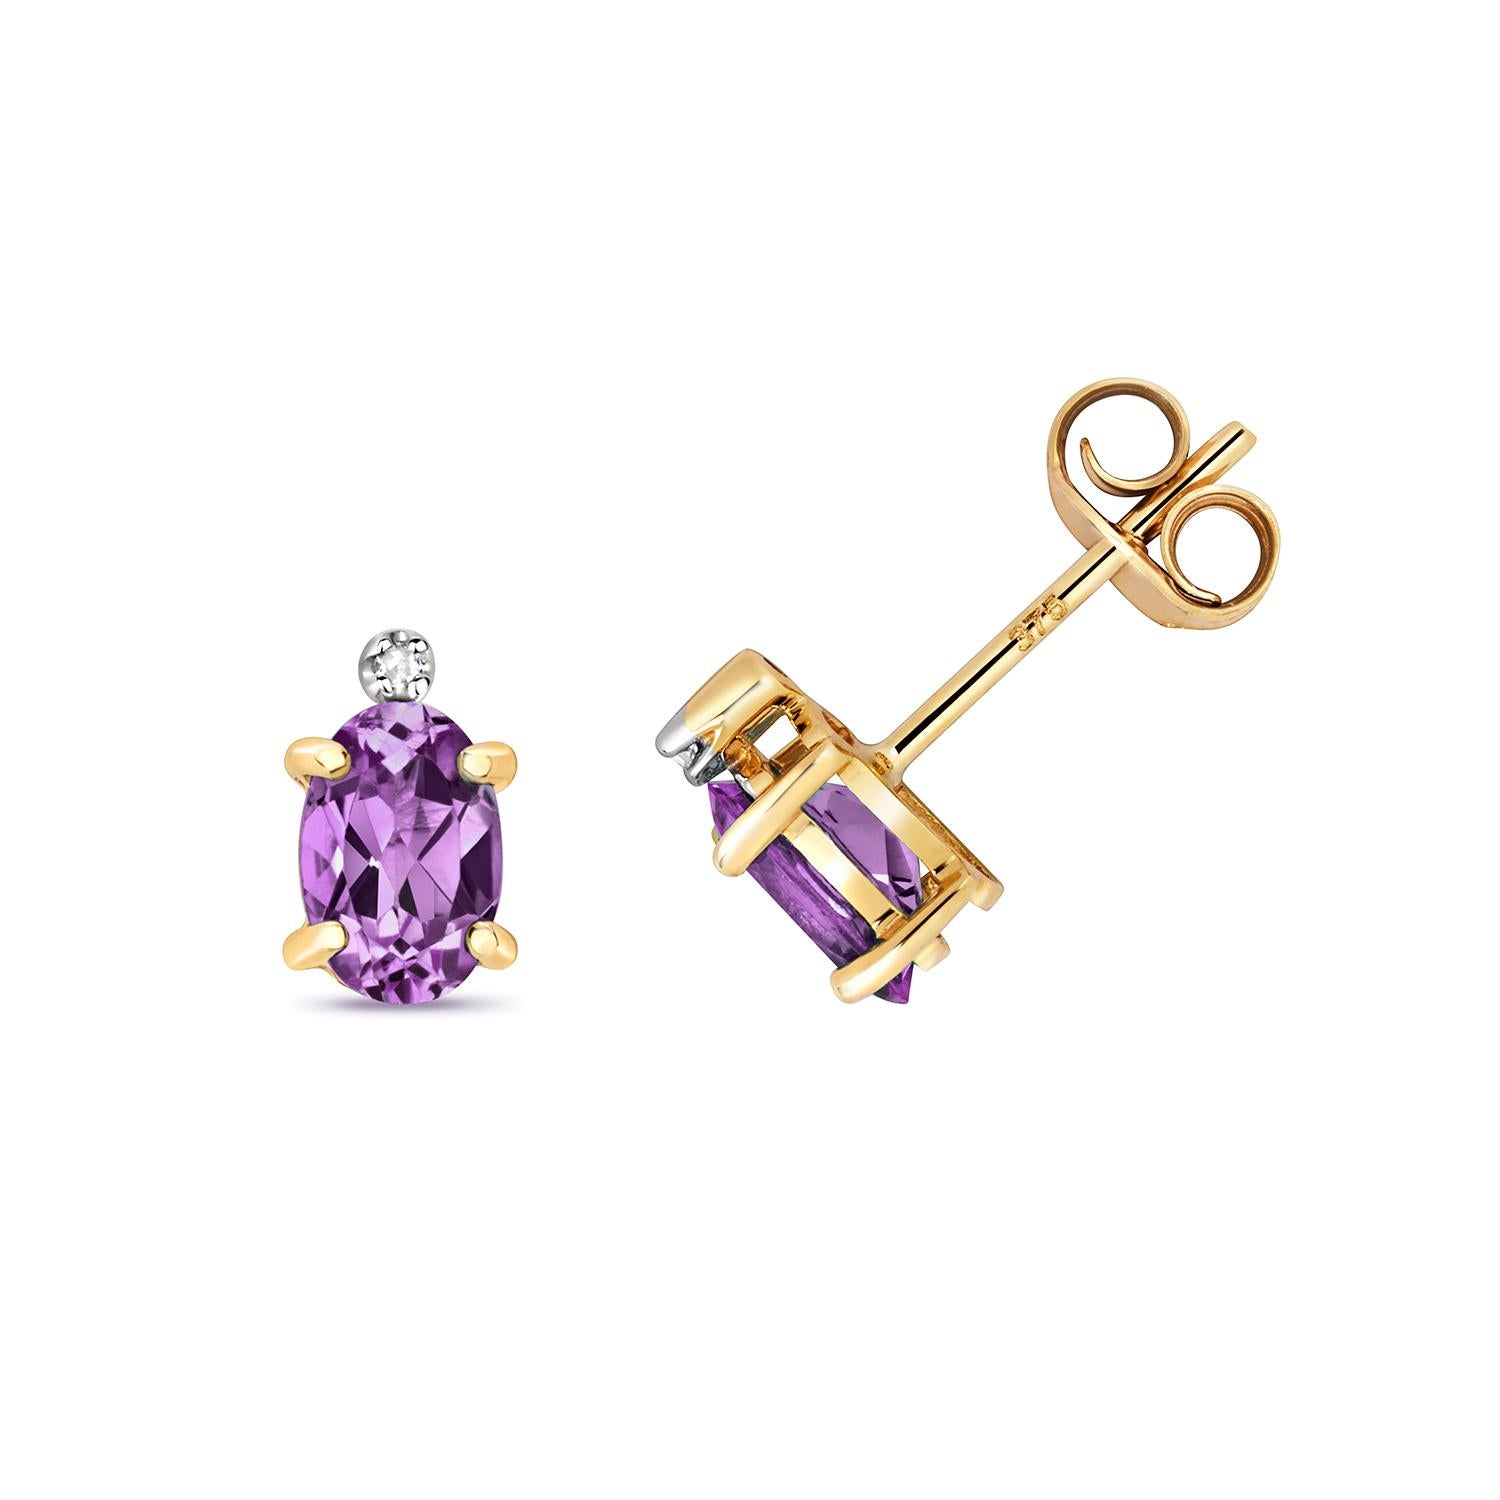 DIAMOND & AMETHYST STUDS

9CT Y/G SC/0.01CT AMT/0.16CT

Weight: 0.8g

Number Of Stones:2+2

Total Carates:0.160+0.010